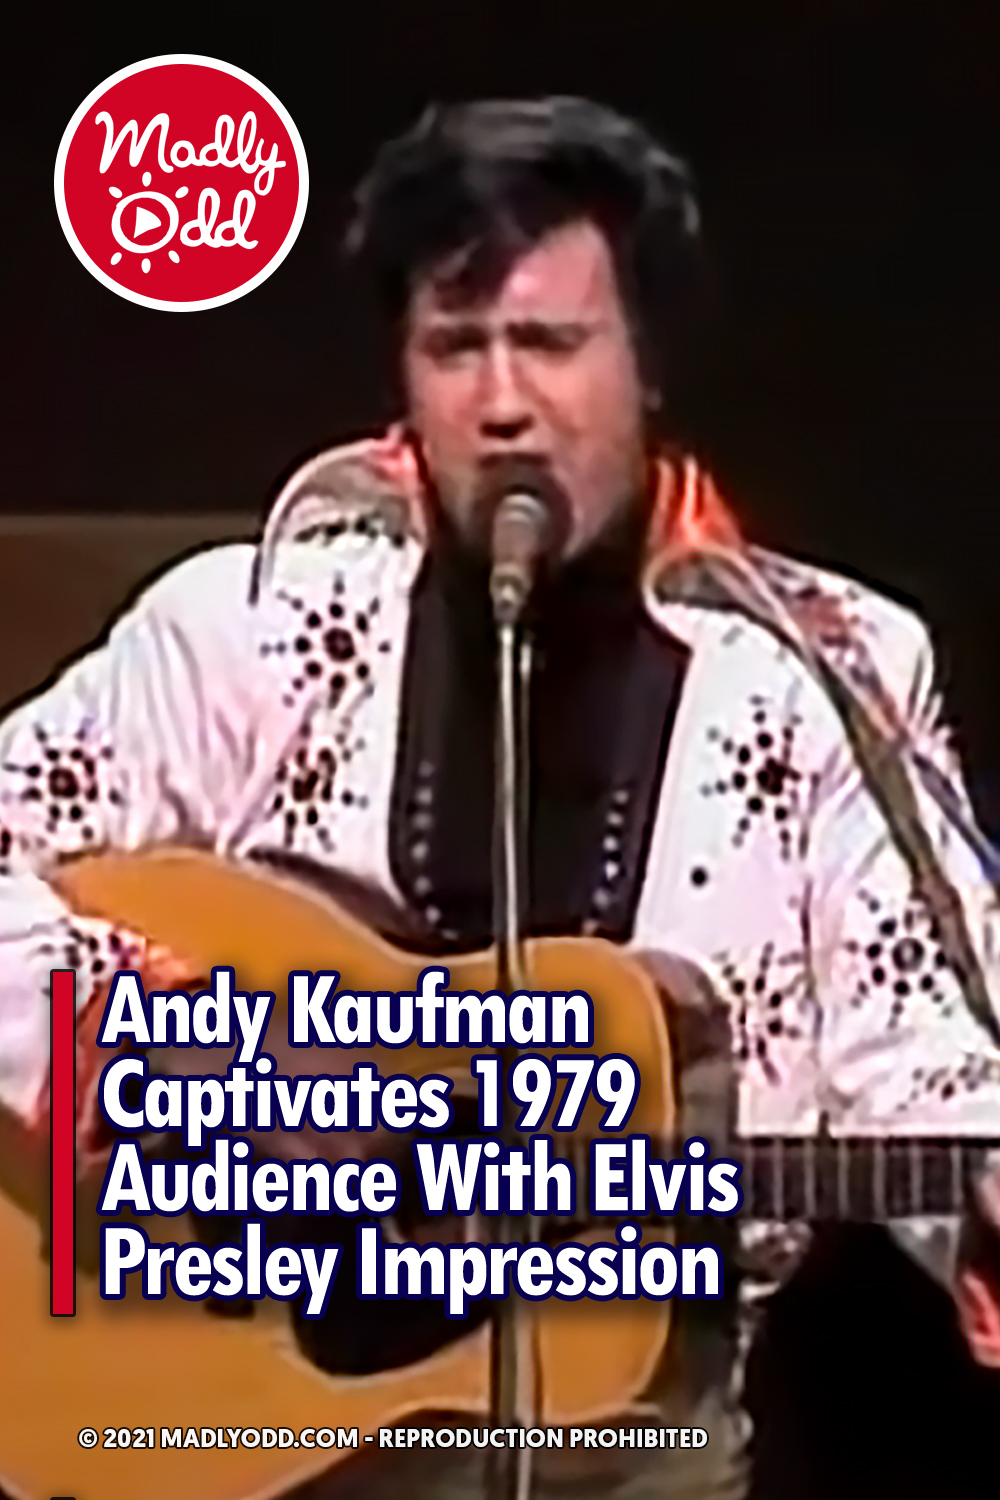 Andy Kaufman Captivates 1979 Audience With Elvis Presley Impression